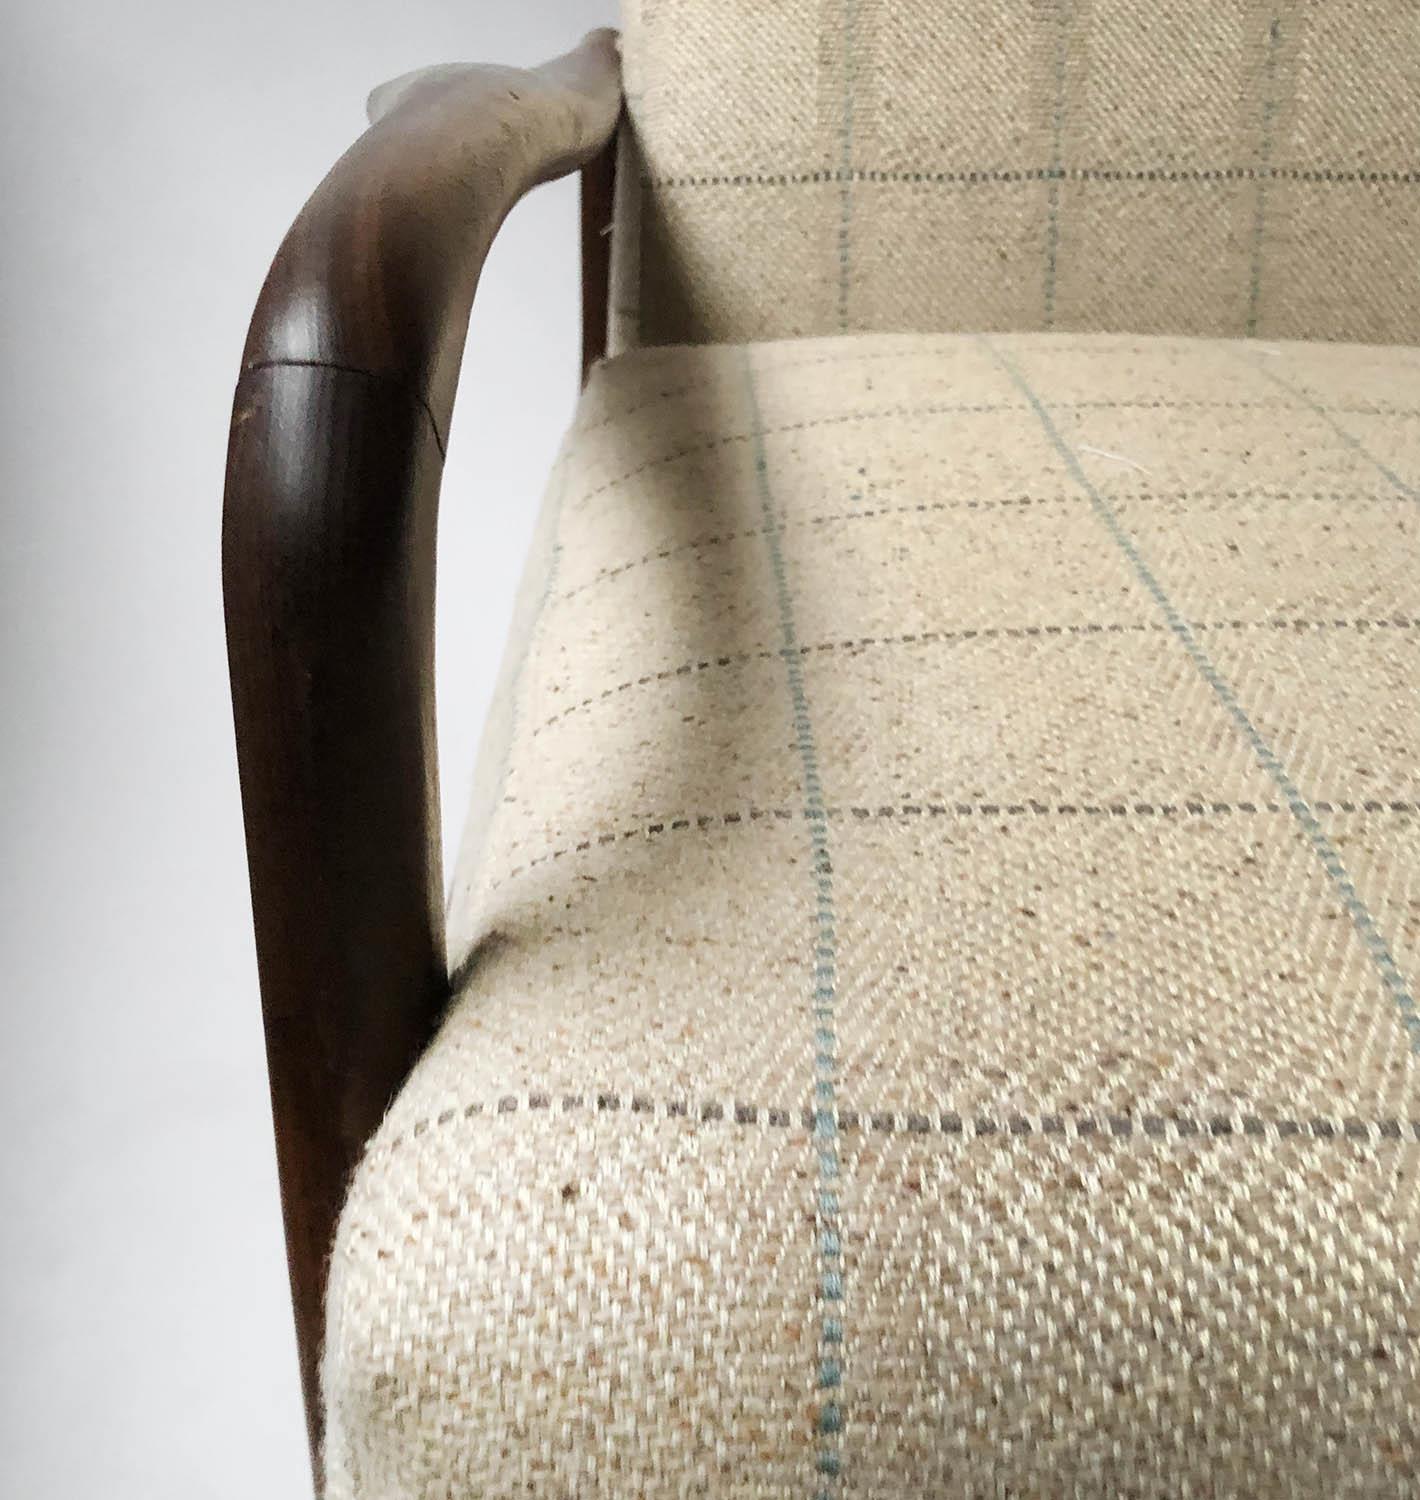 DANISH ARMCHAIR, 3rd quarter 20th century Danish teak open armchair with oatmeal check upholstery. - Image 7 of 7